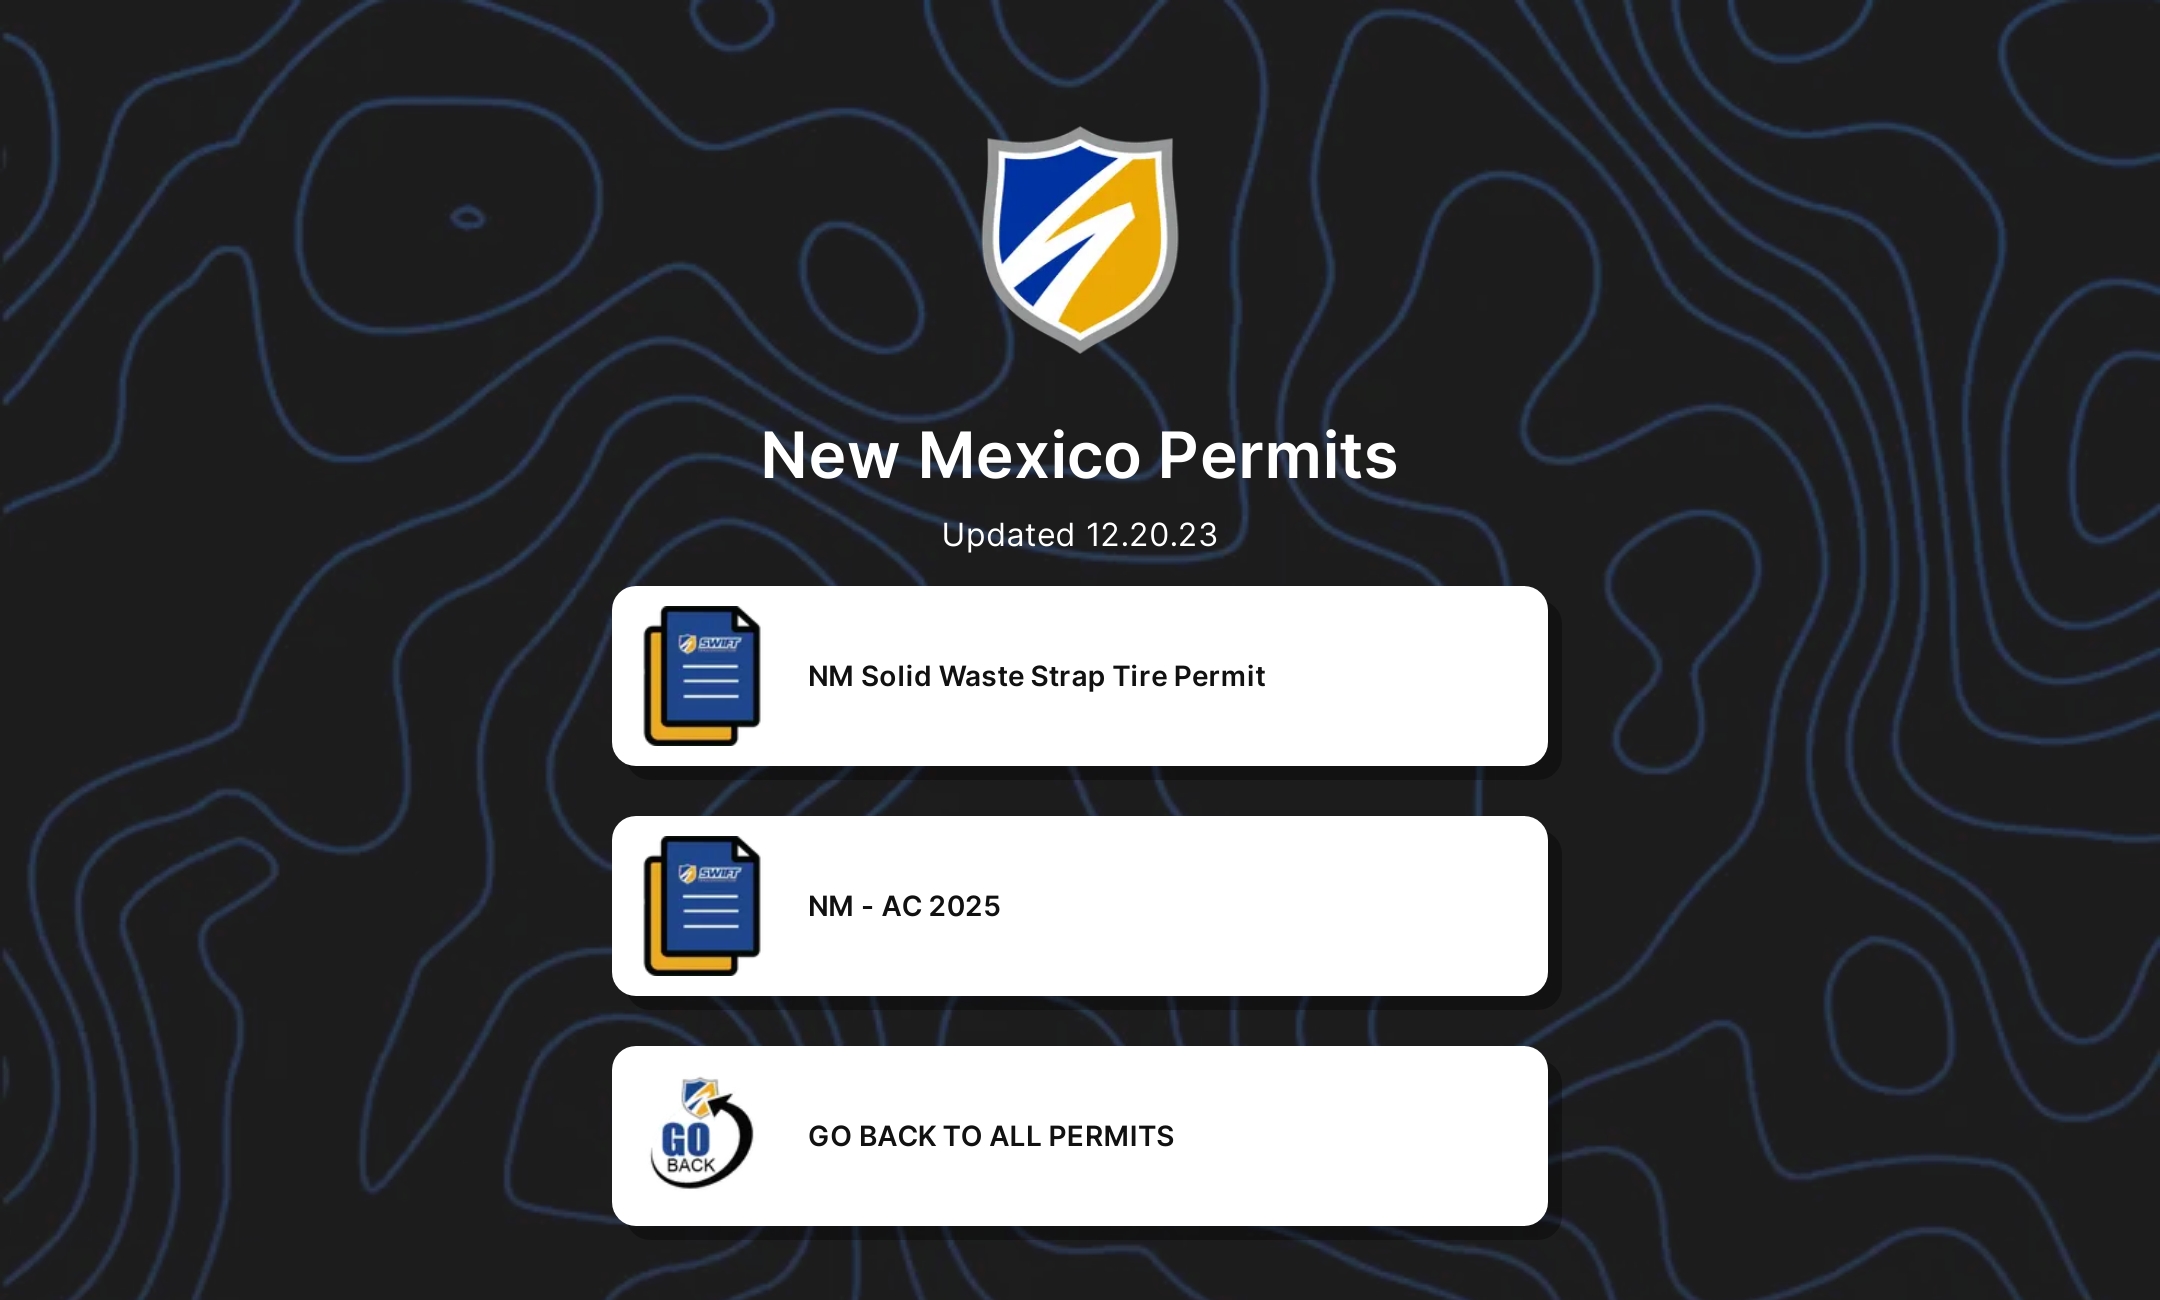 New Mexico Permits' Flowpage